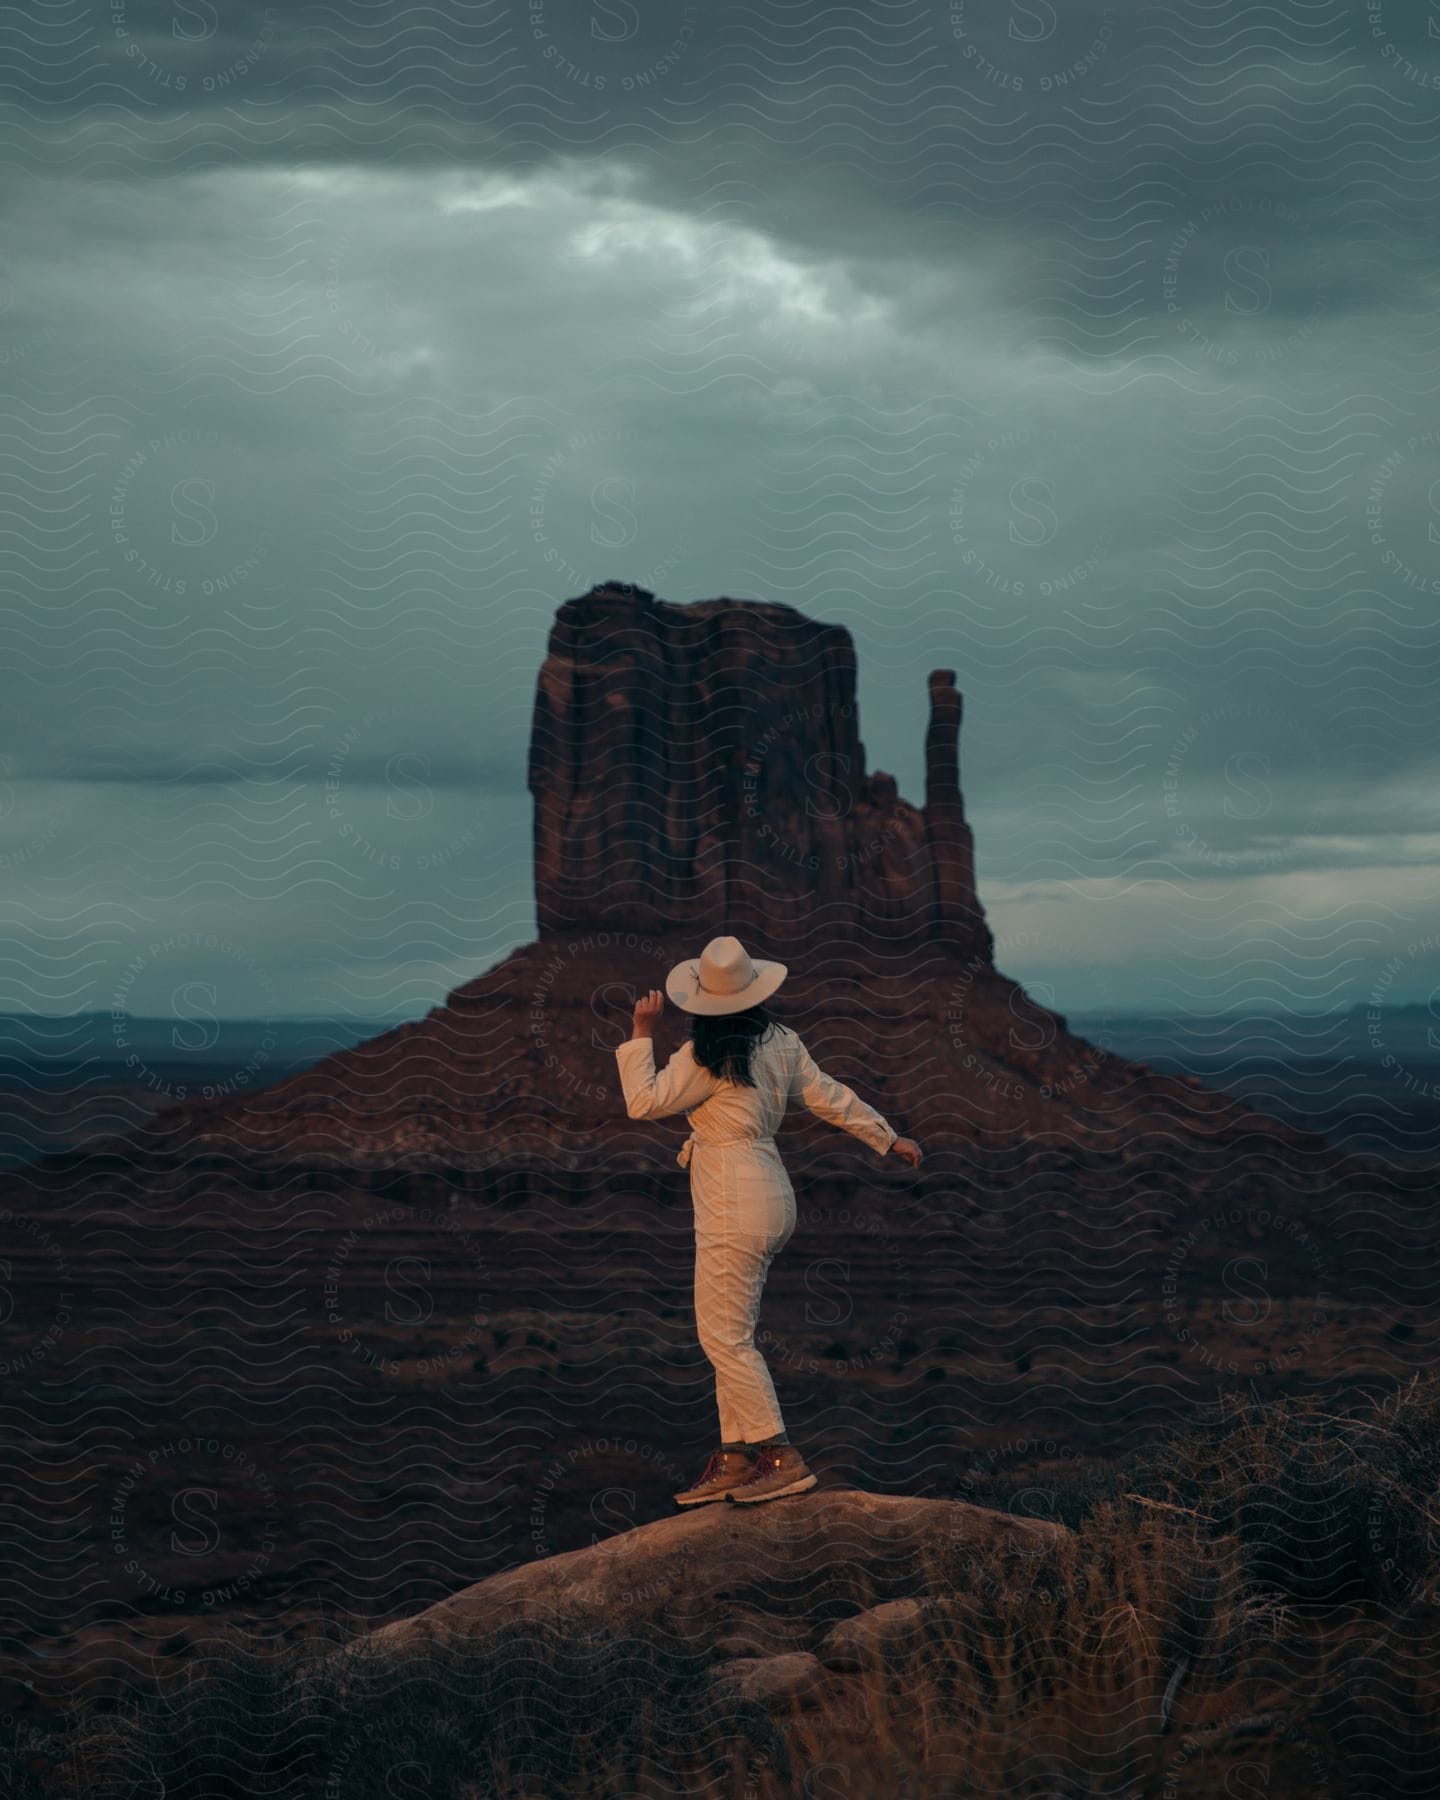 A woman wearing a hat looks at one of the famous rocks in Monument Valley.